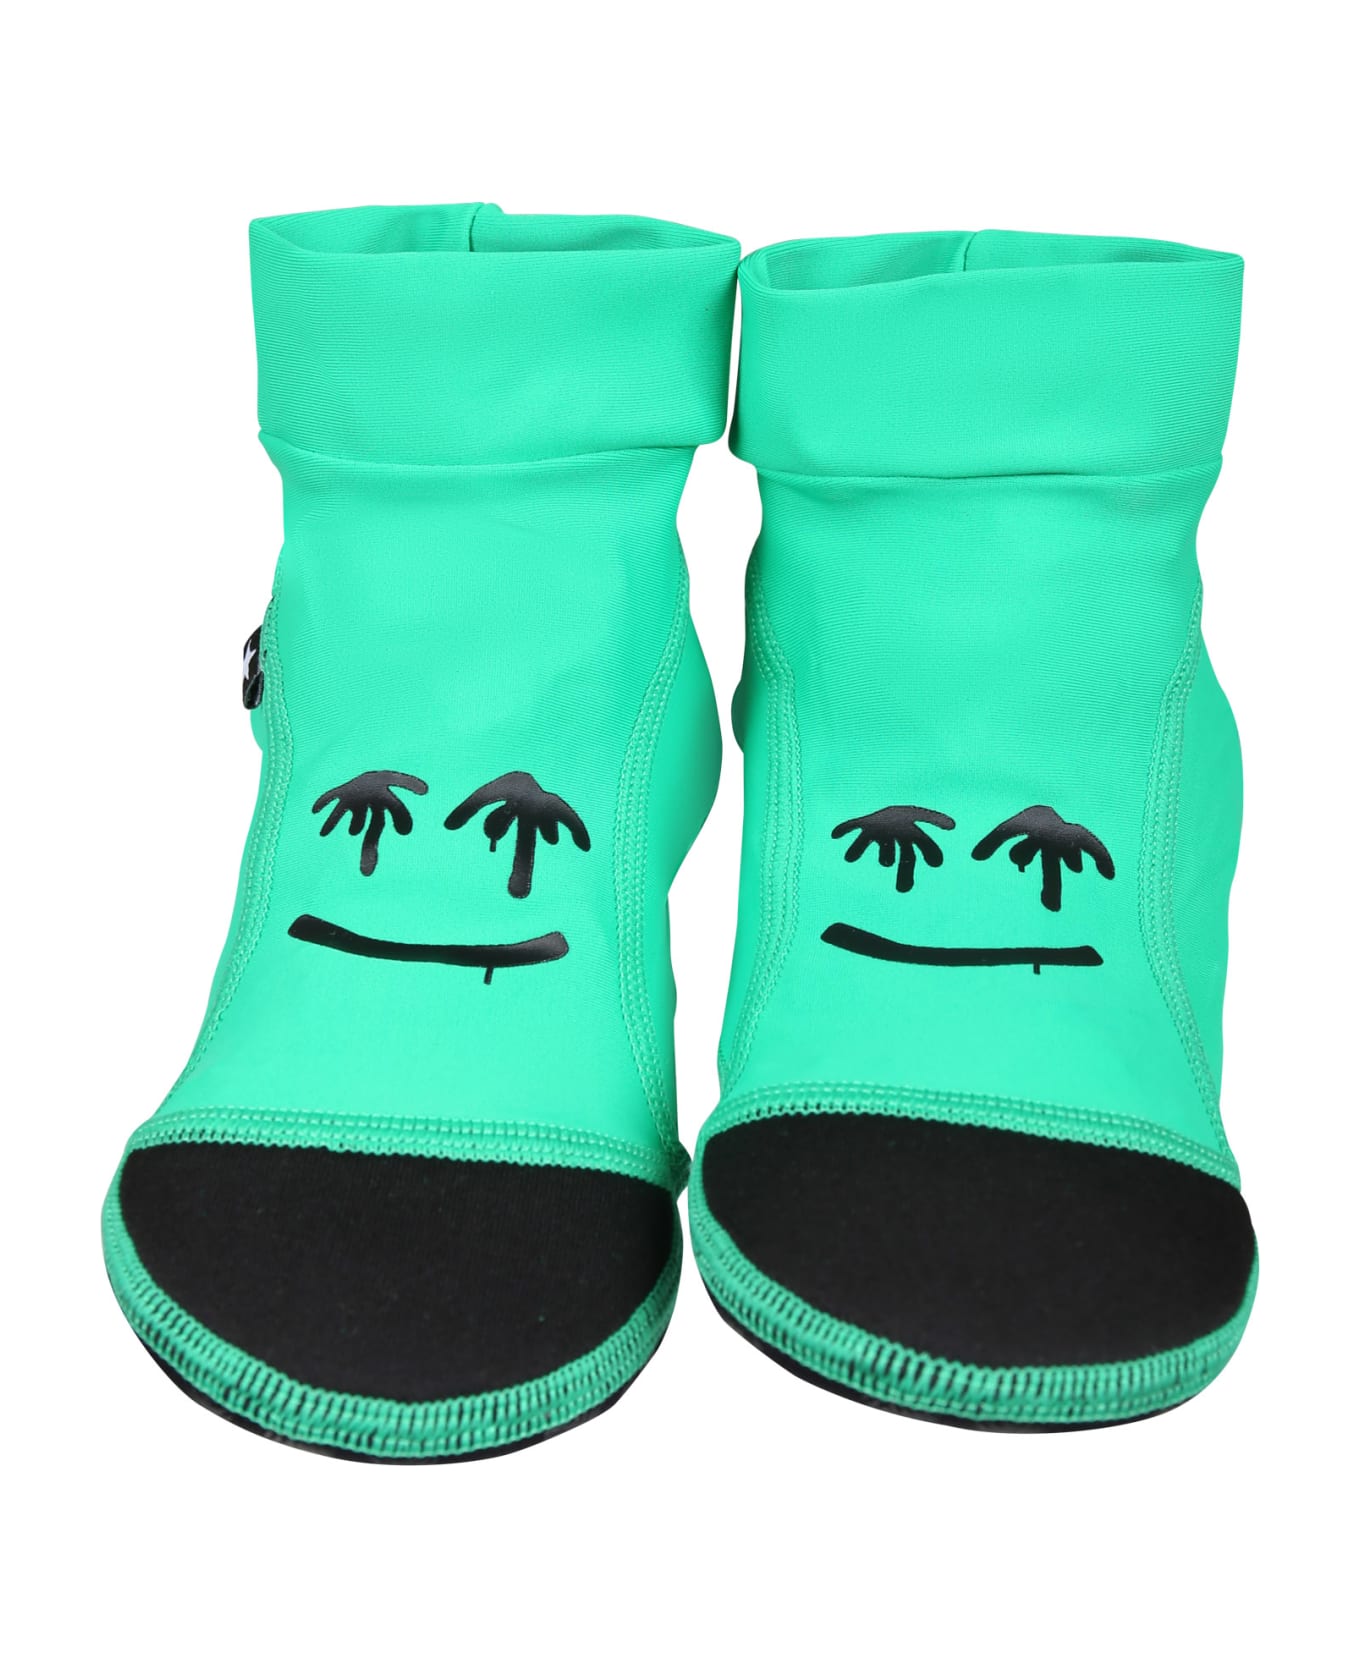 Molo Green Socks For Kids With Smiley - Green